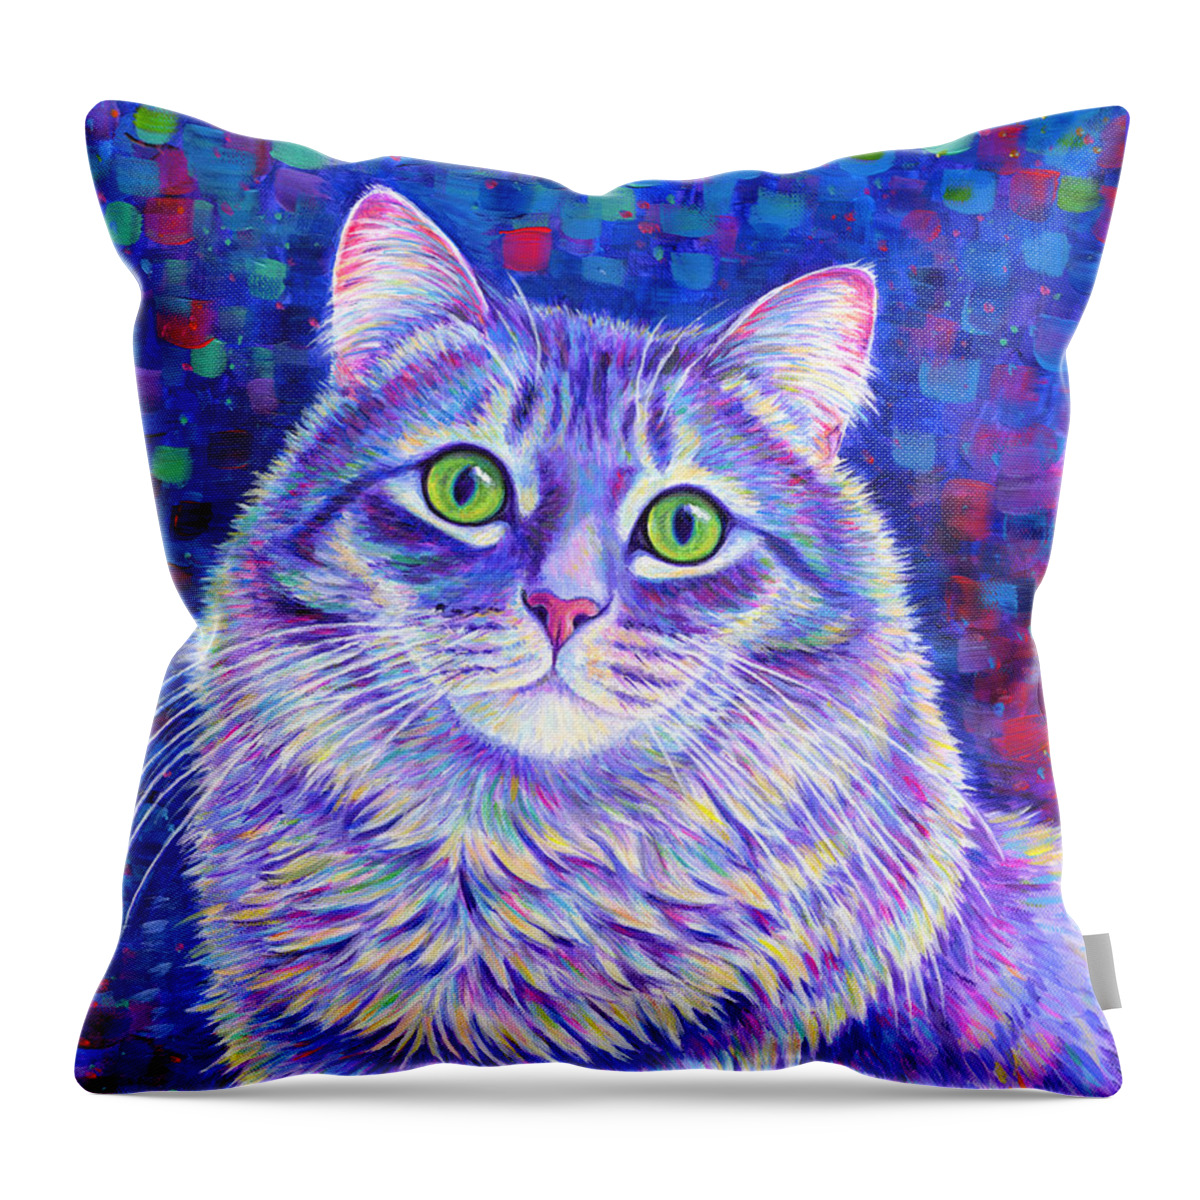 Gray Tabby Throw Pillow featuring the painting Iridescence - Colorful Gray Tabby Cat by Rebecca Wang